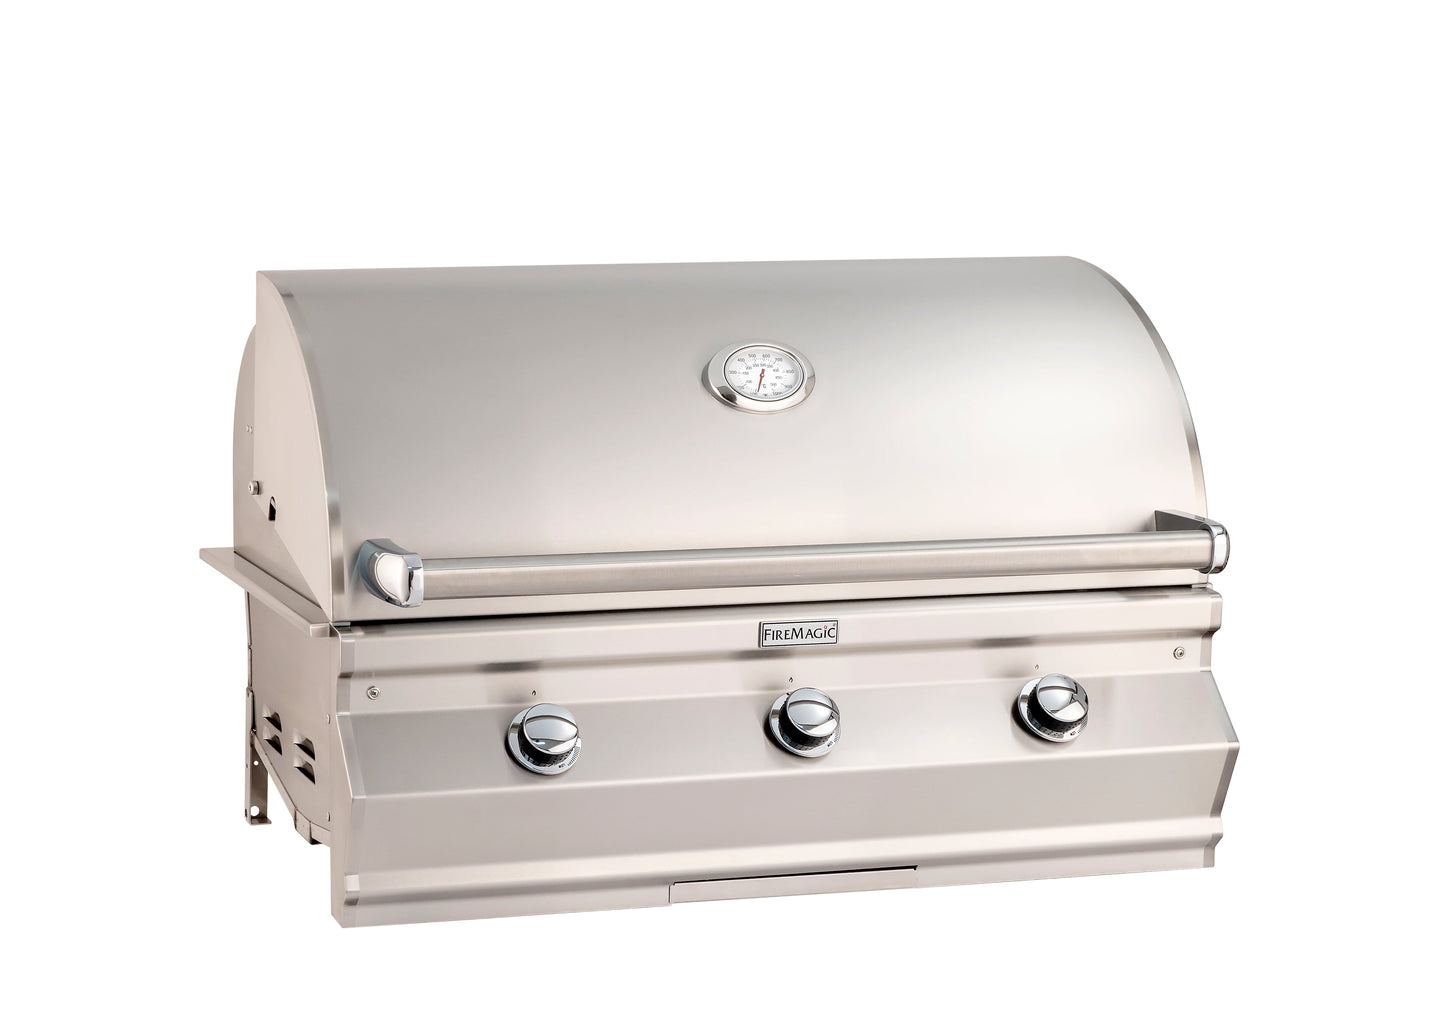 Firemagic Choice 30 Inch Built-In Gas Grill | C540i-RT1N |